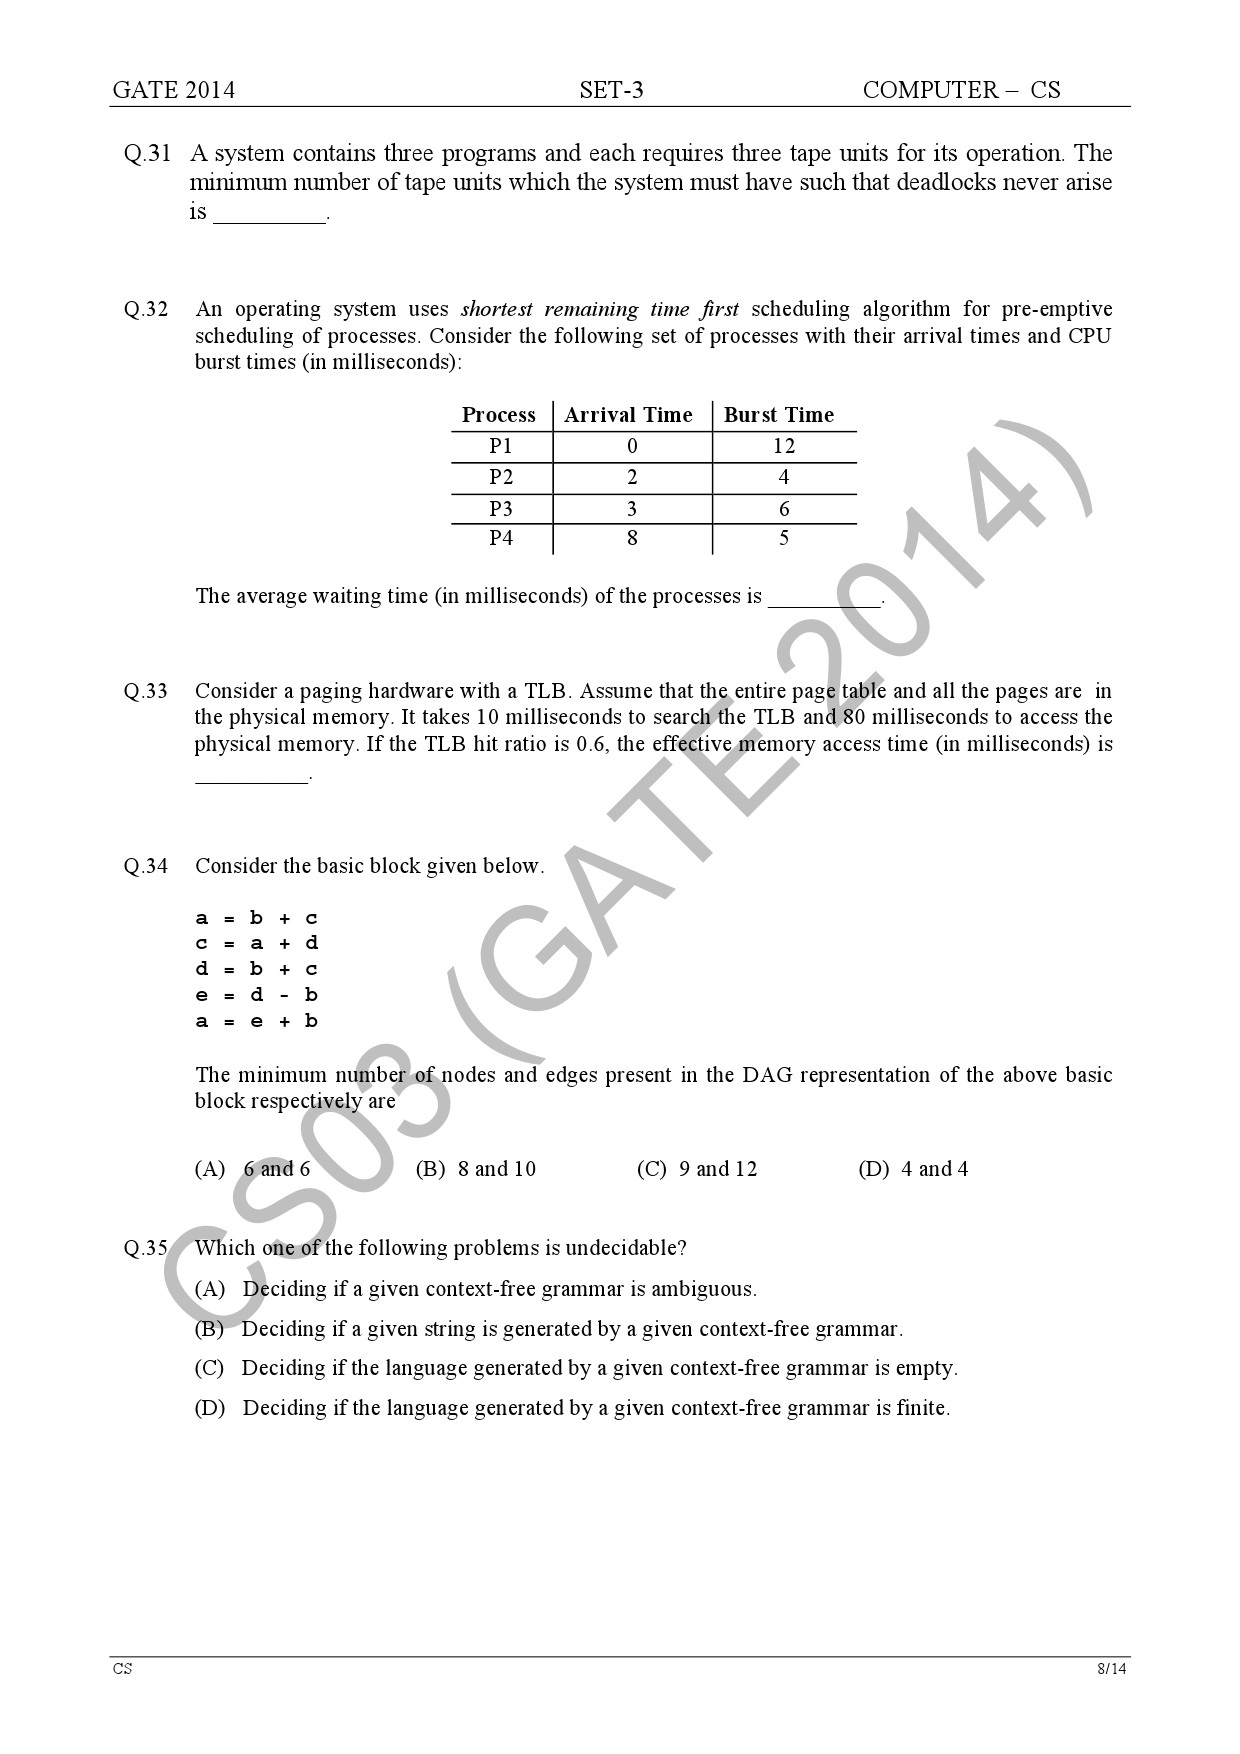 GATE Exam Question Paper 2014 Computer Science and Information Technology Set 3 14